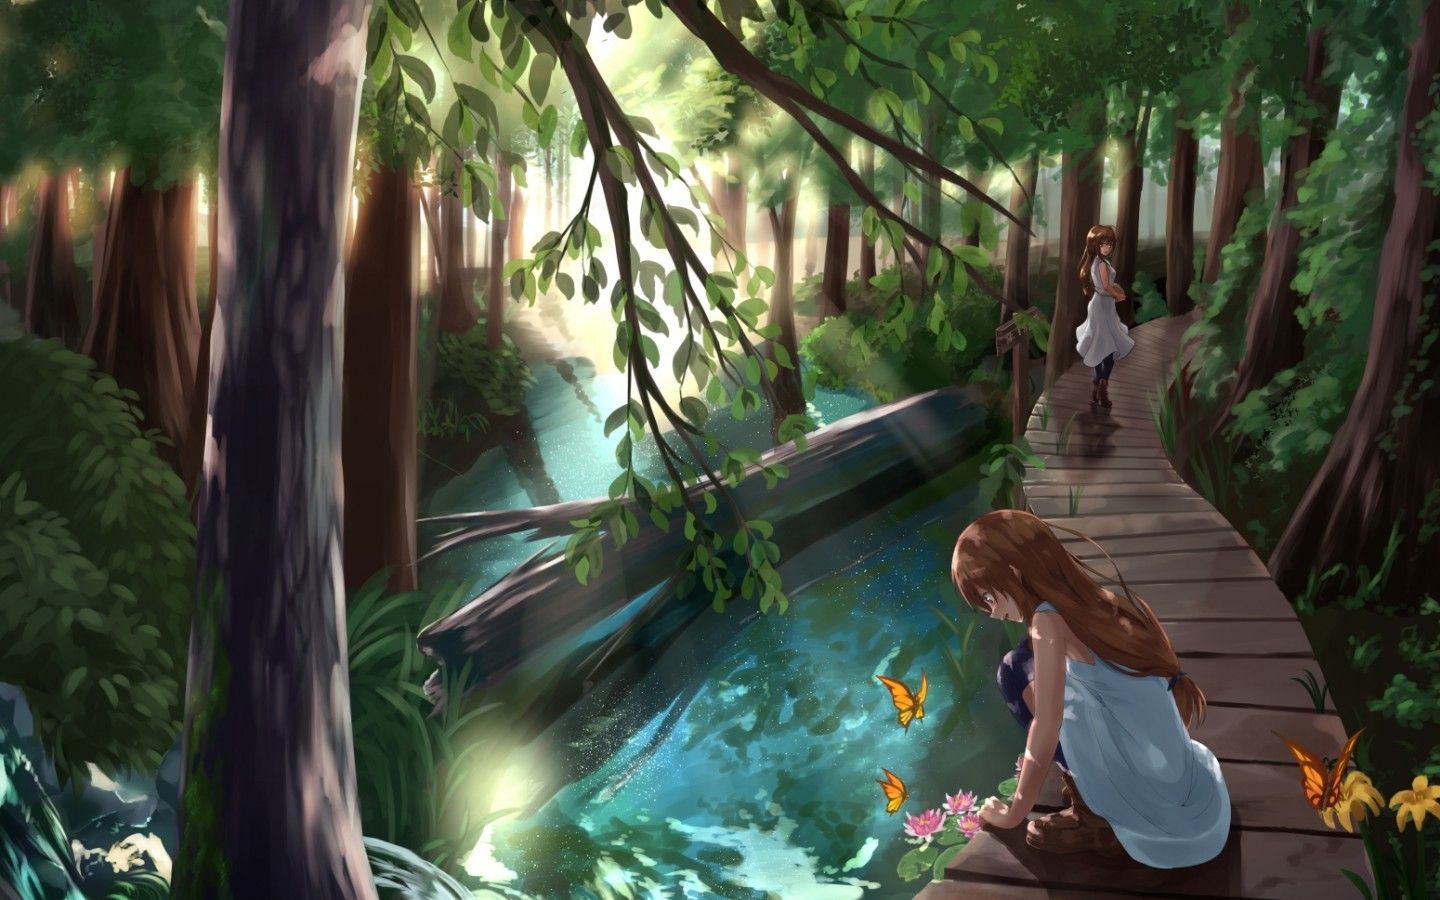 Download 1440x900 Anime Girls, Forest, River, Trees, Nature